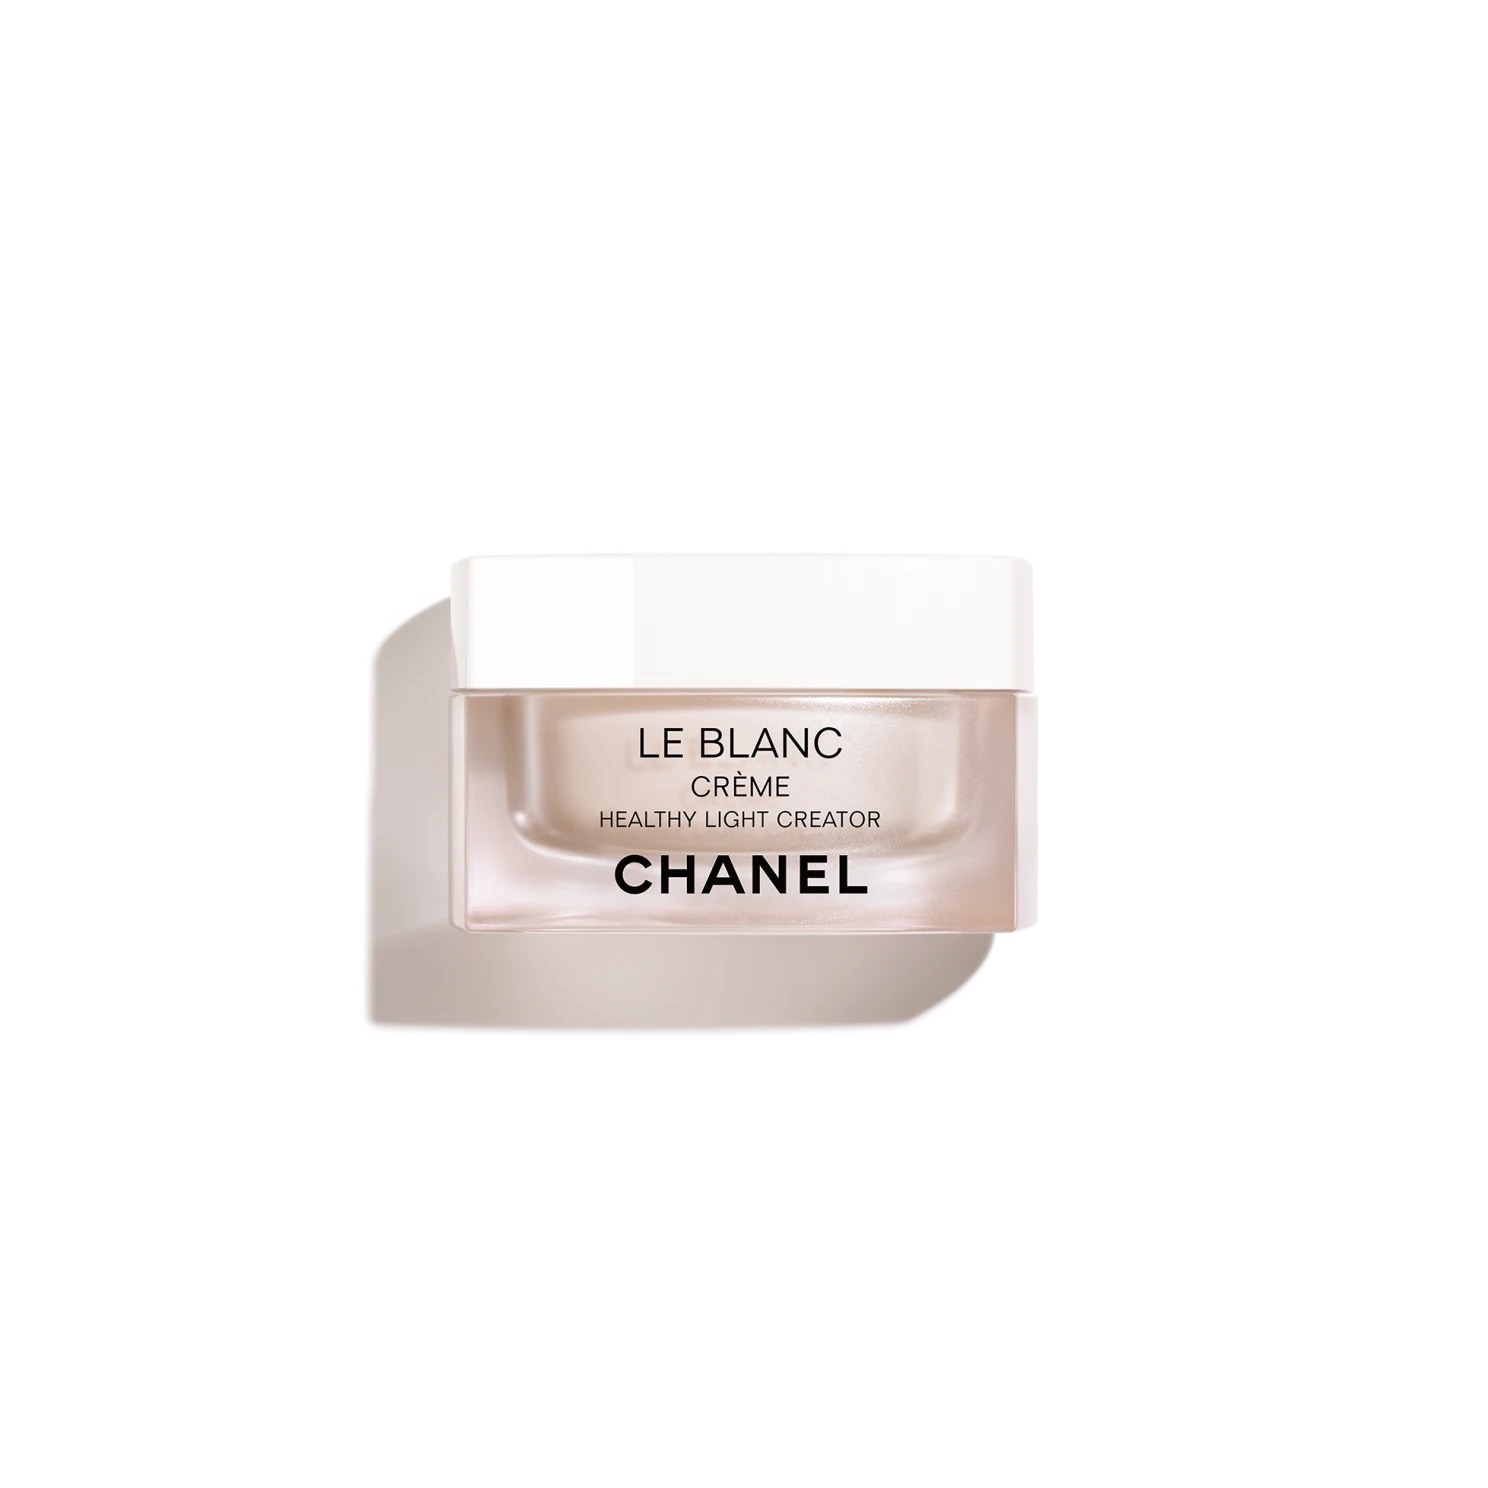 Chanel LE BLANC CRÈME HEALTHY LIGHT CREATOR 50g-United States-Japan Online  Shopping - Hommi